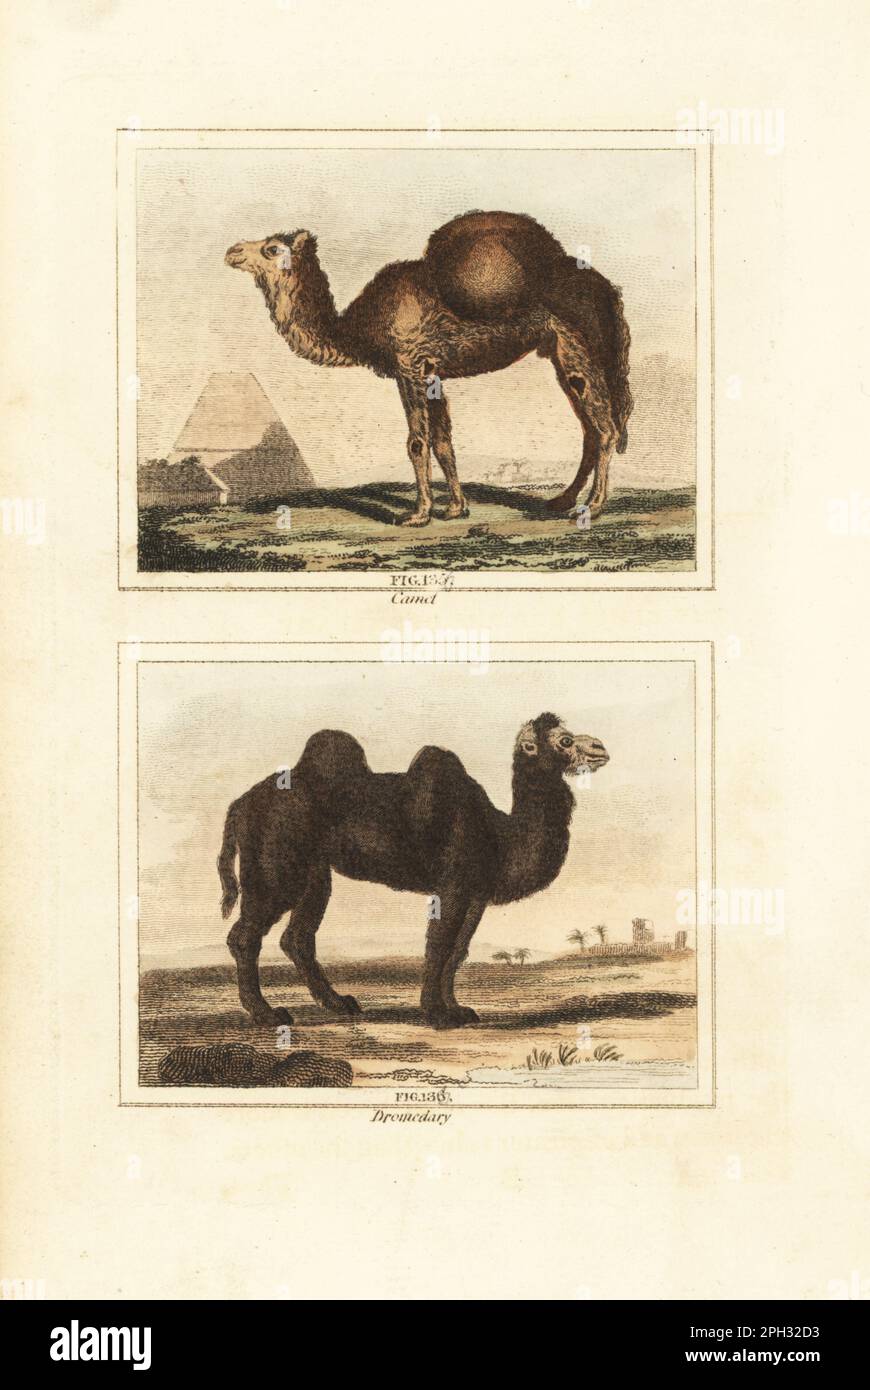 Dromedary camel, Camelus dromedarius, in front of a pyramid (top), and Bactrian camel, Camelus bactrianus (bottom). Handcoloured copperplate engraving after Jacques de Seve from James Smith Barr’s edition of Comte Buffon’s Natural History, A Theory of the Earth, General History of Man, Brute Creation, Vegetables, Minerals, T. Gillet, H. D. Symonds, Paternoster Row, London, 1807. Stock Photo